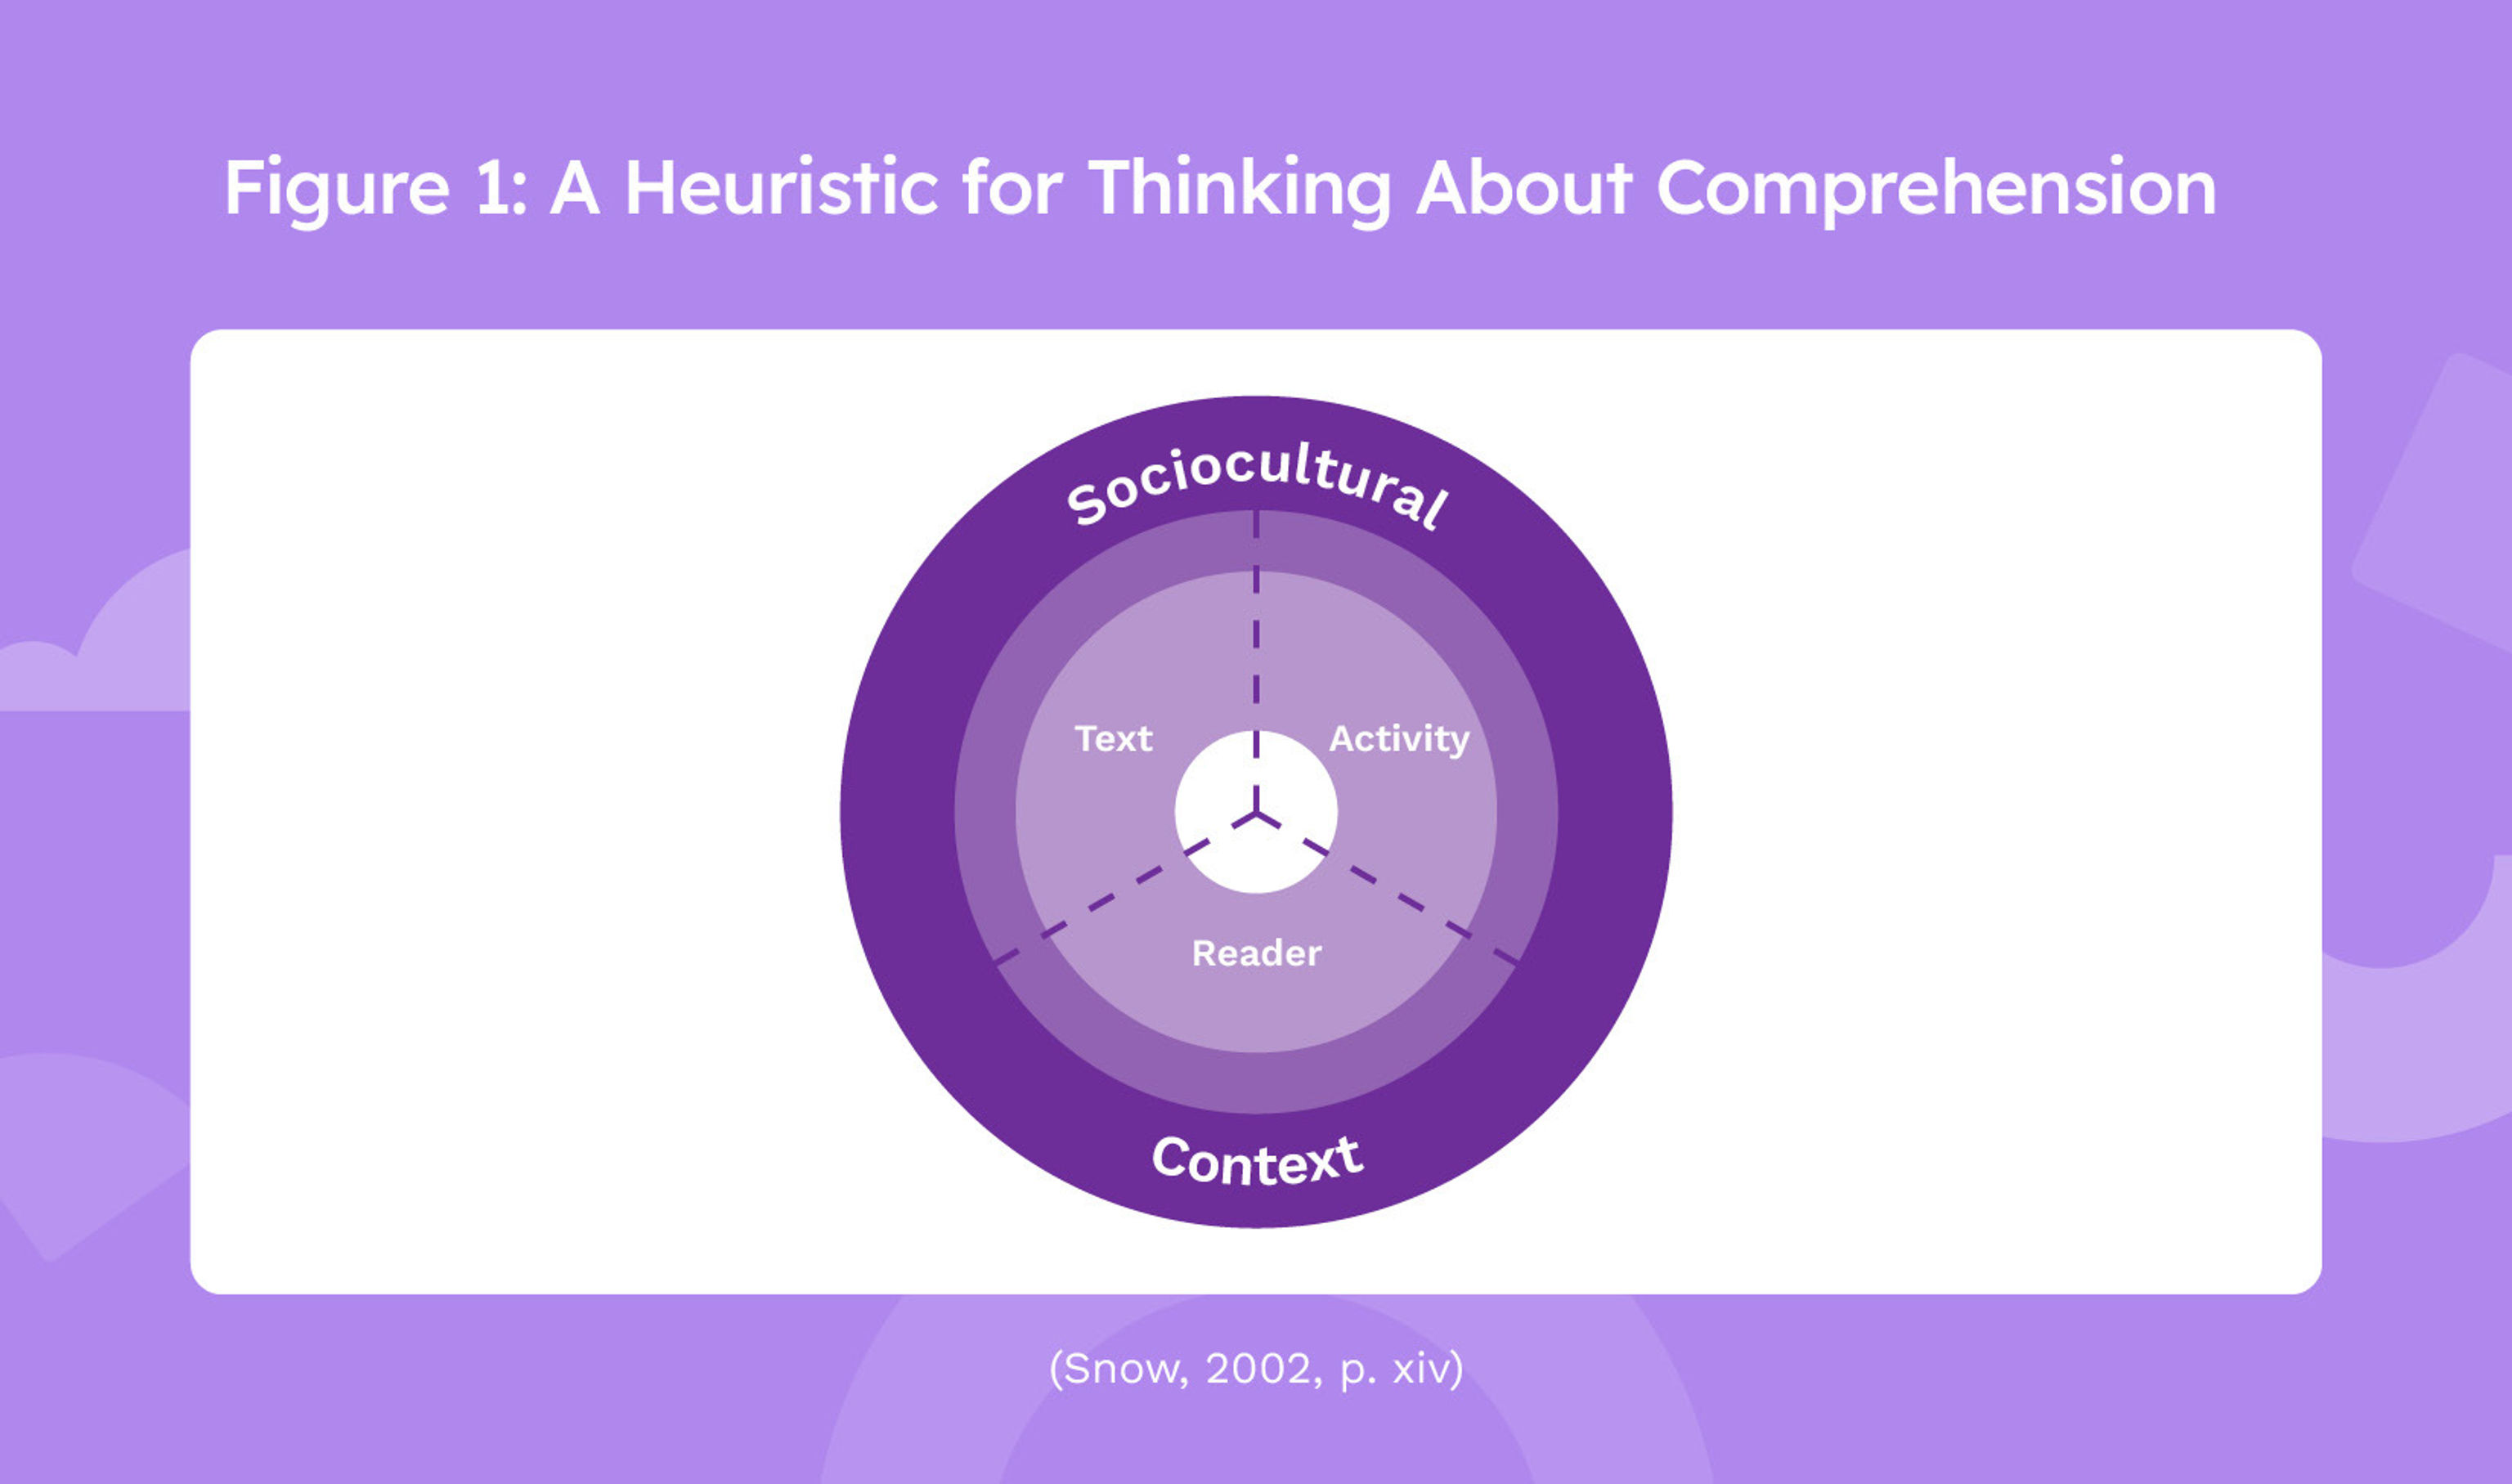 A circular graphic illustrating a heuristic for thinking about comprehension from Catherine Snow in 2002, with sociocultural and context influences surrounding text, activity and reader.